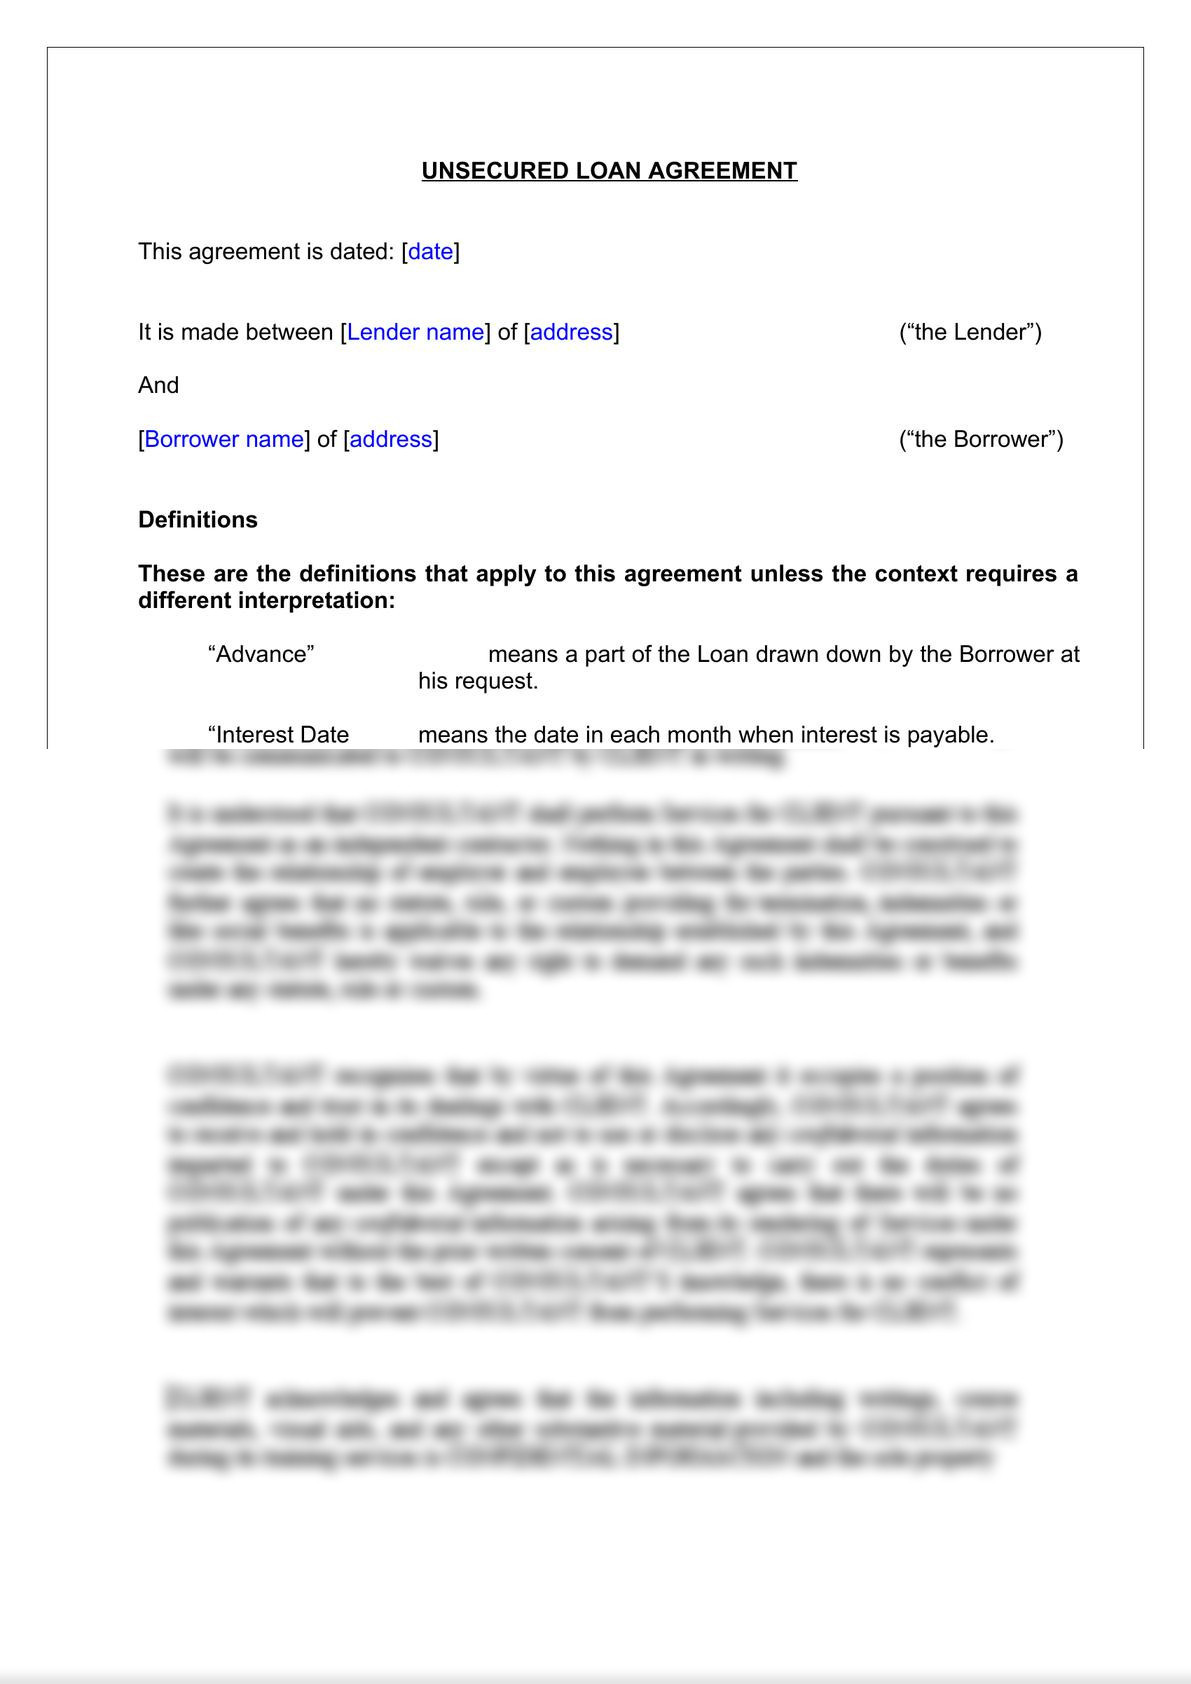 Unsecured Loan Agreement-2